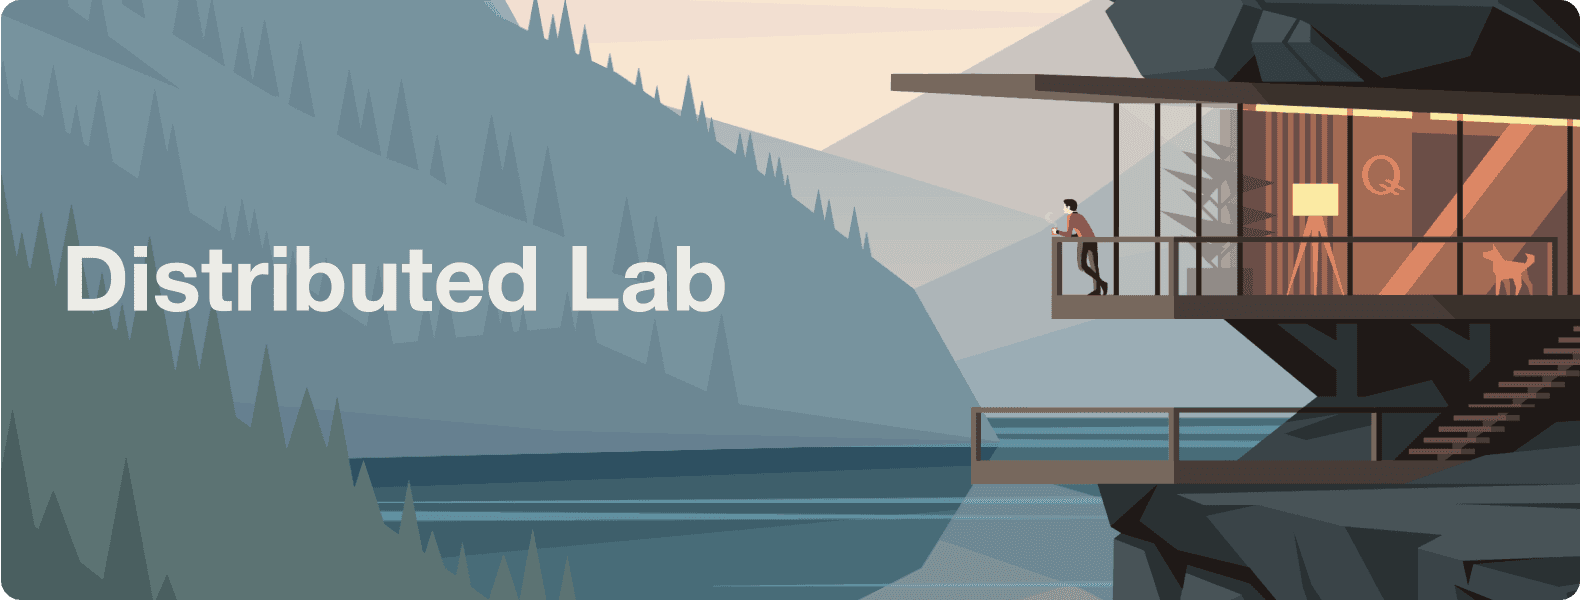 Distributed Lab